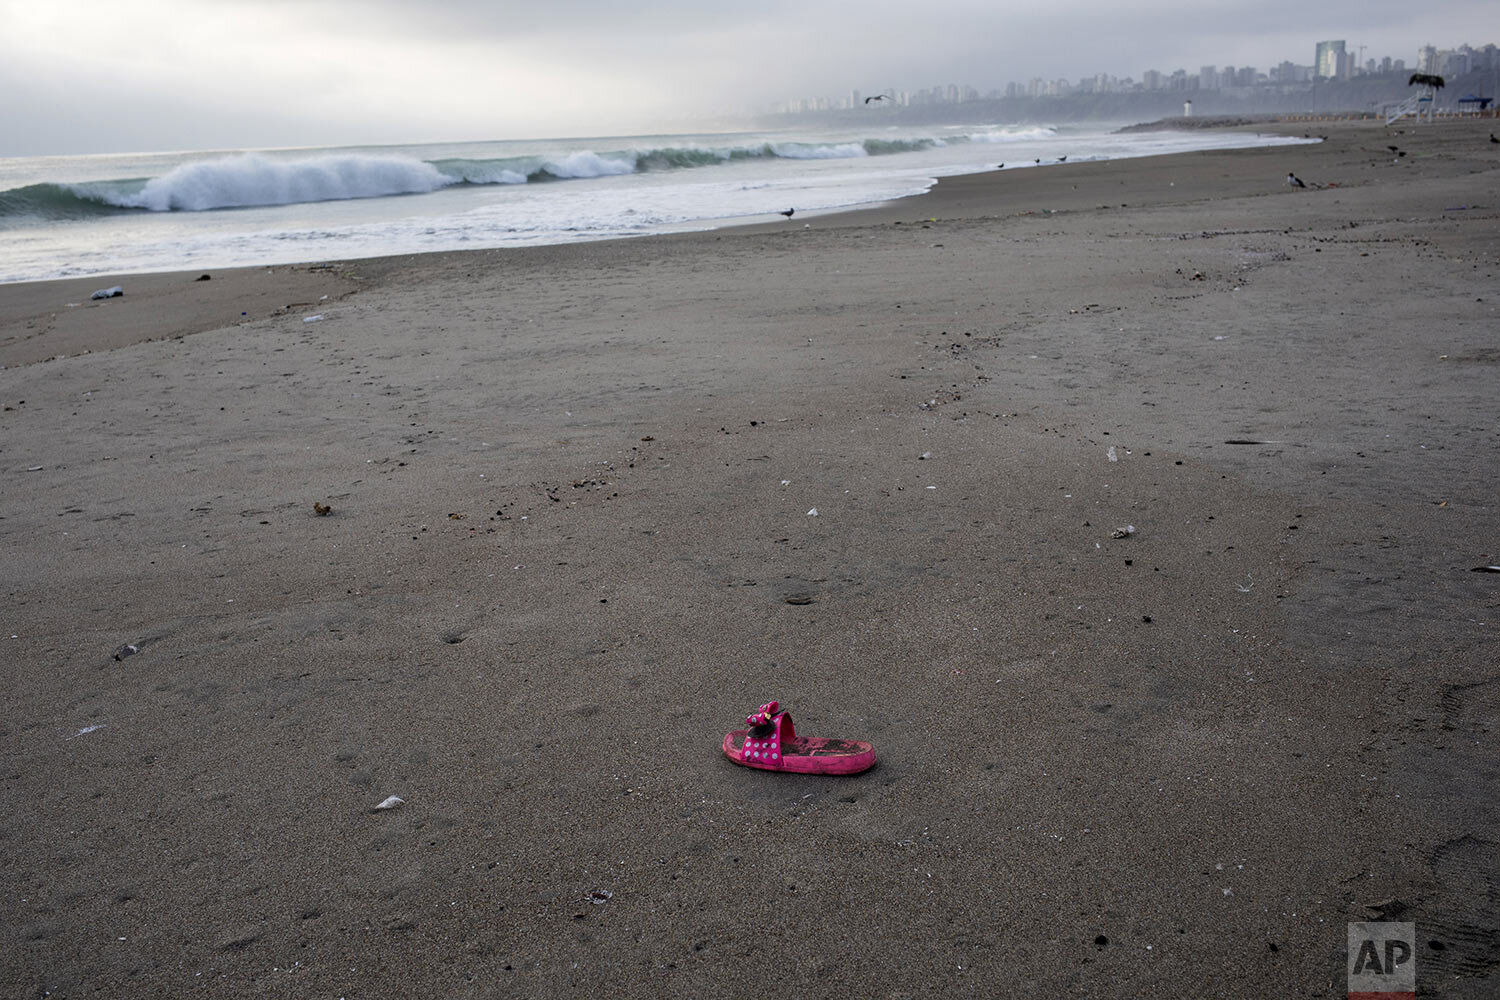  A lost sandal sits on the shore of Agua Dulce beach typically packed with thousands of beachgoers this time of year, in Lima, Peru, March 25, 2020. (AP Photo/Rodrigo Abd) 